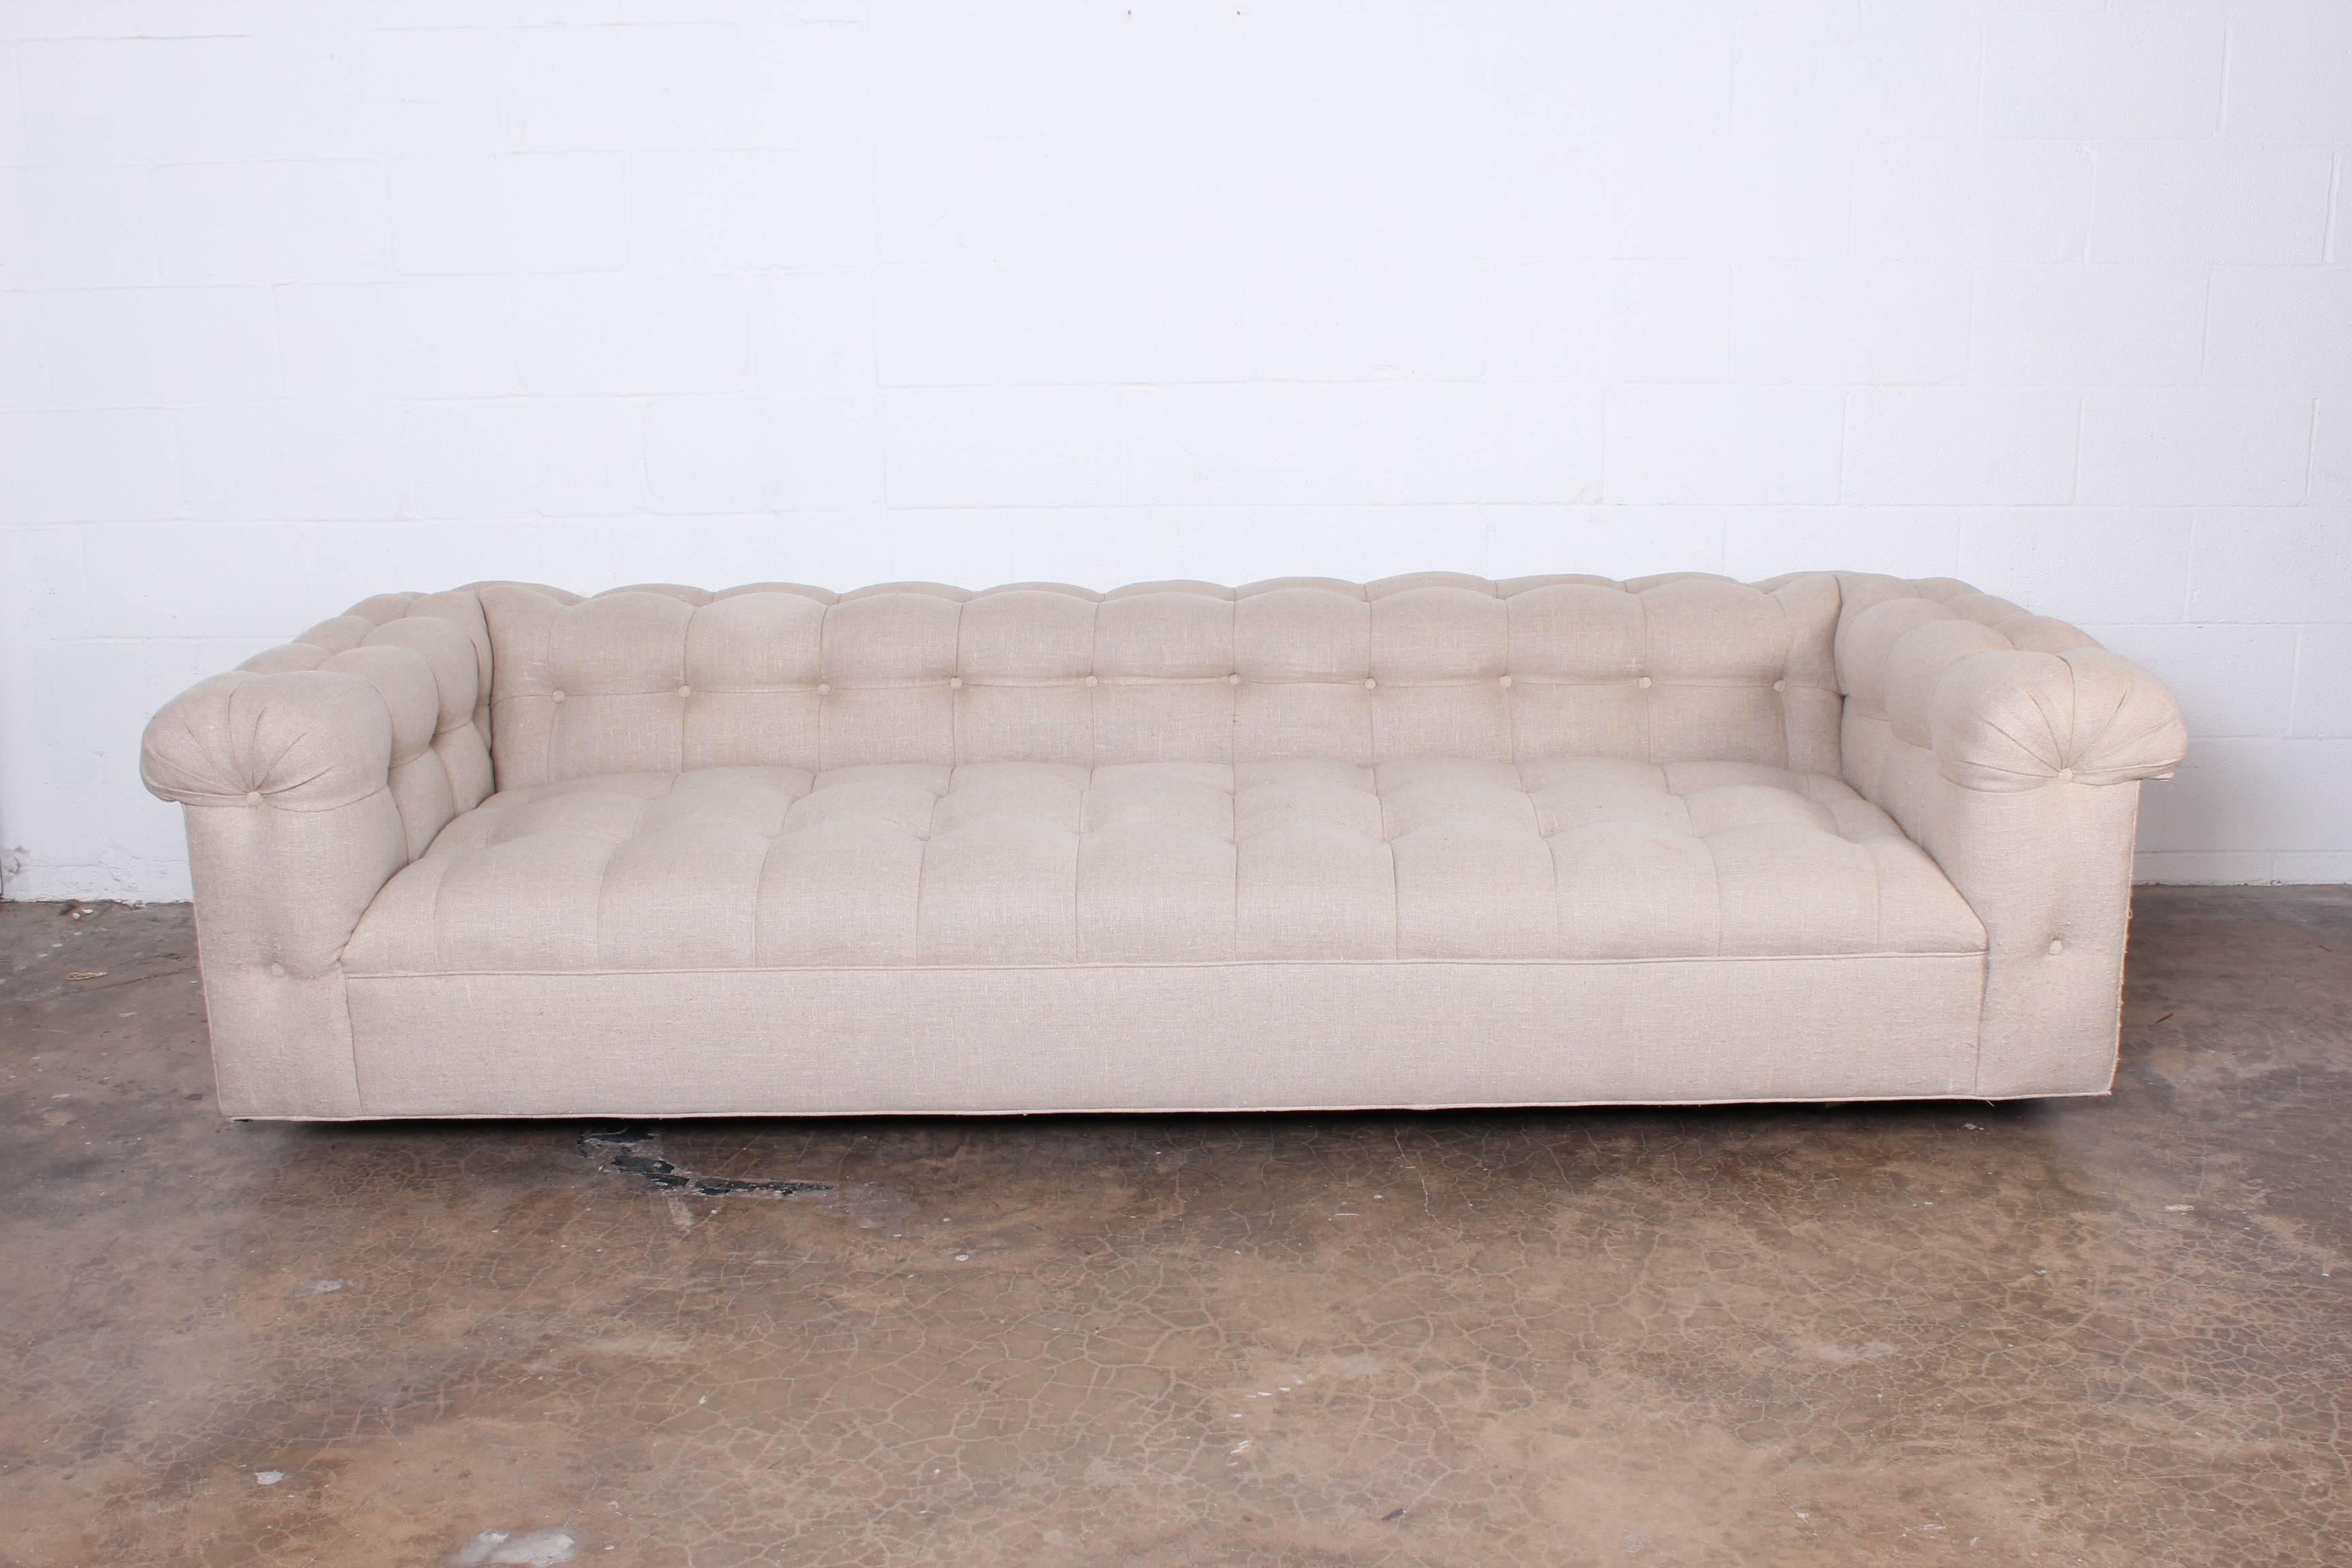 A Classic modernist Chesterfield "Part Sofa" designed by Edward Wormley for Dunbar. Pair available. 